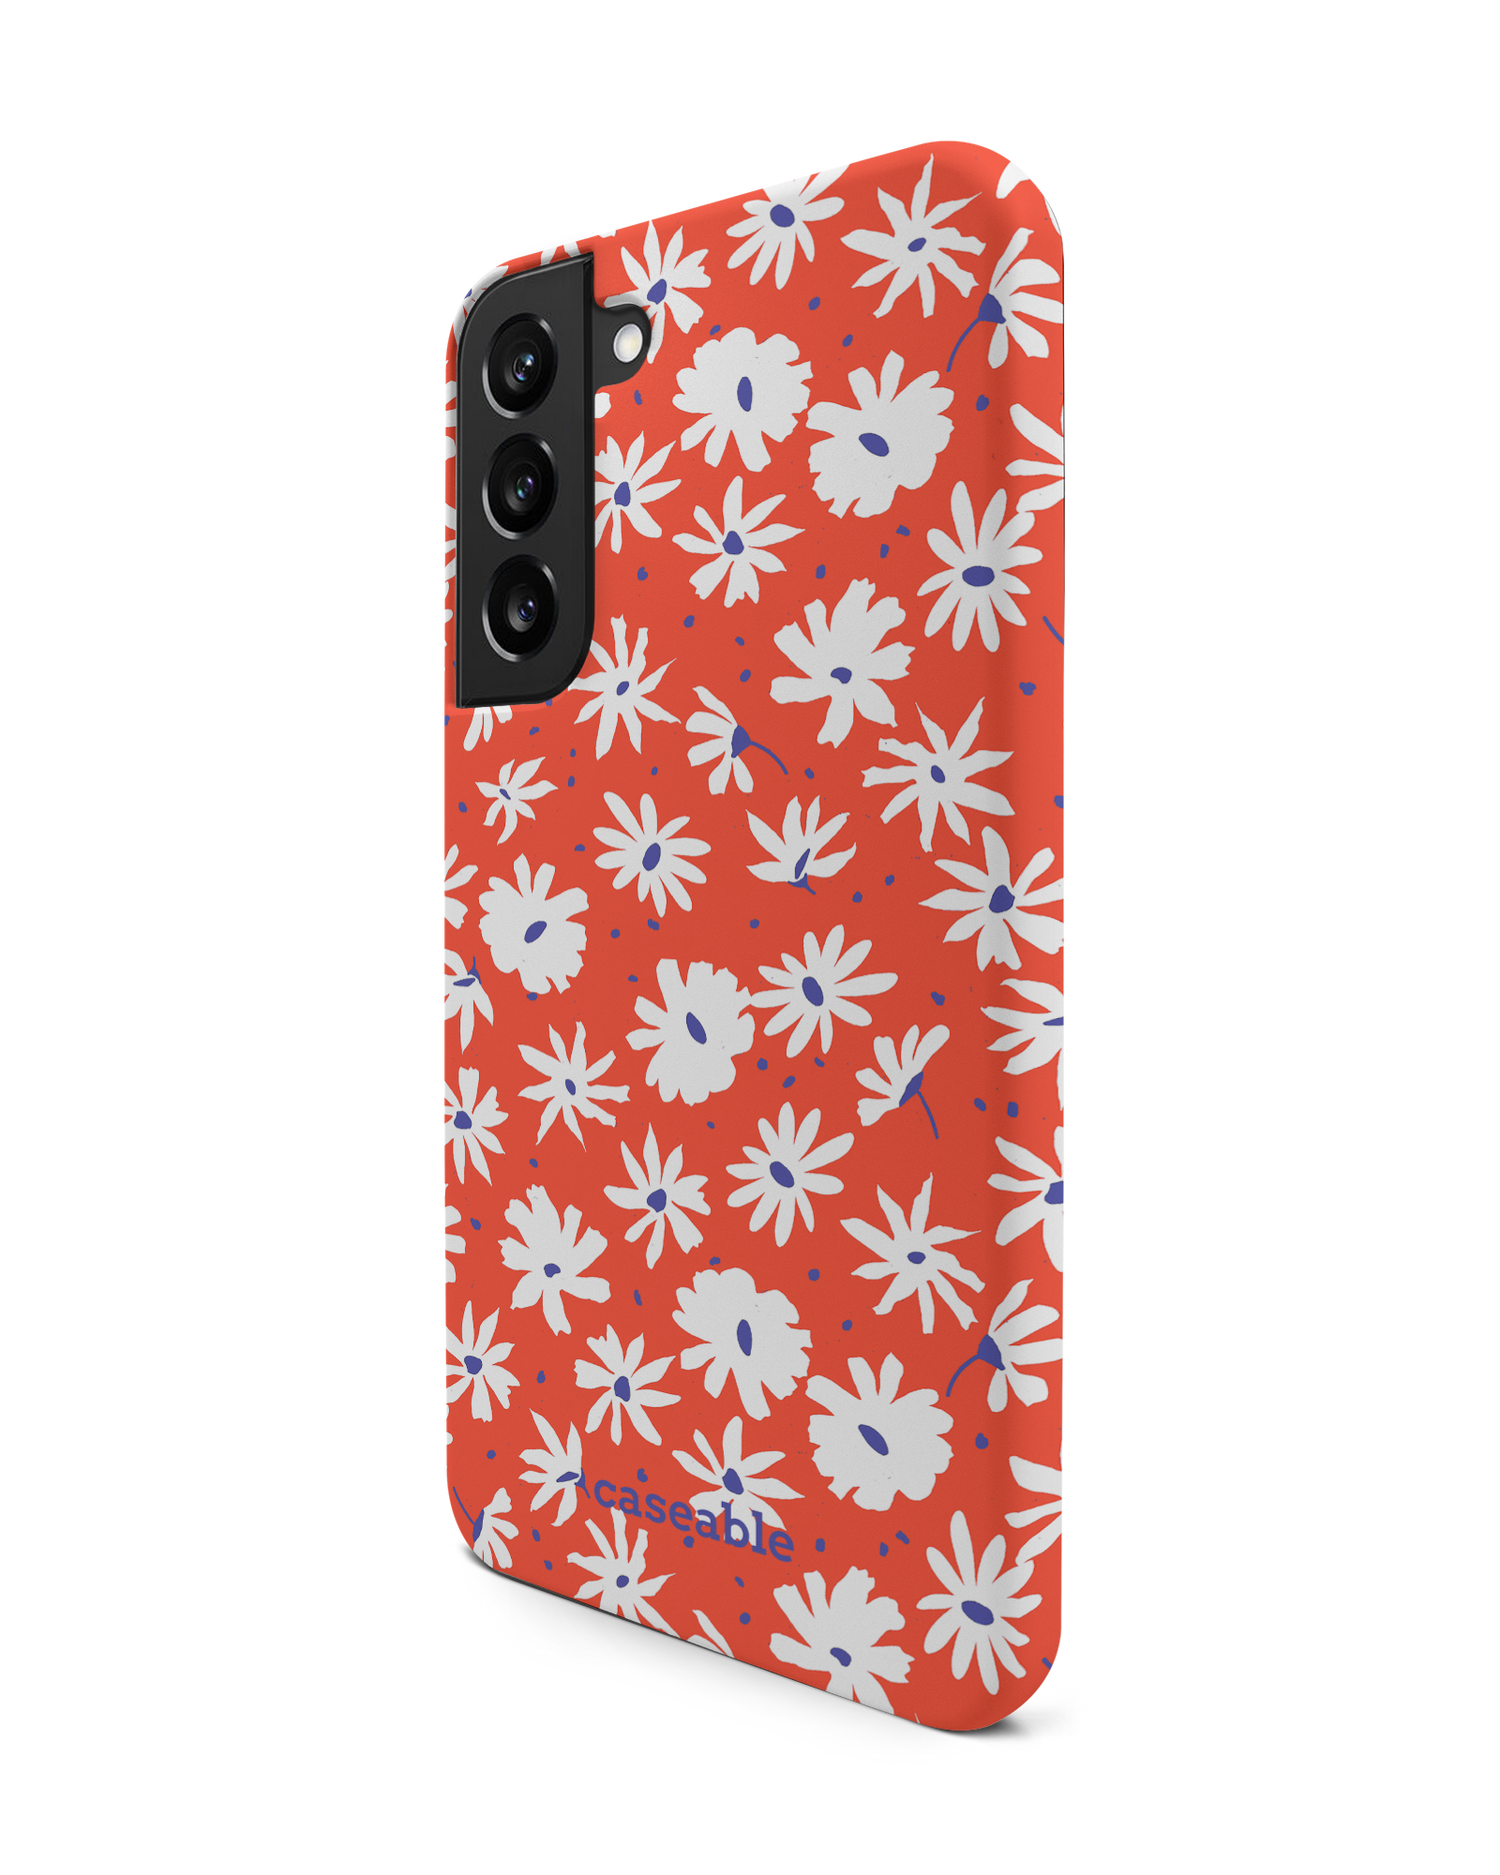 Retro Daisy Premium Phone Case Samsung Galaxy S22 Plus 5G: View from the right side